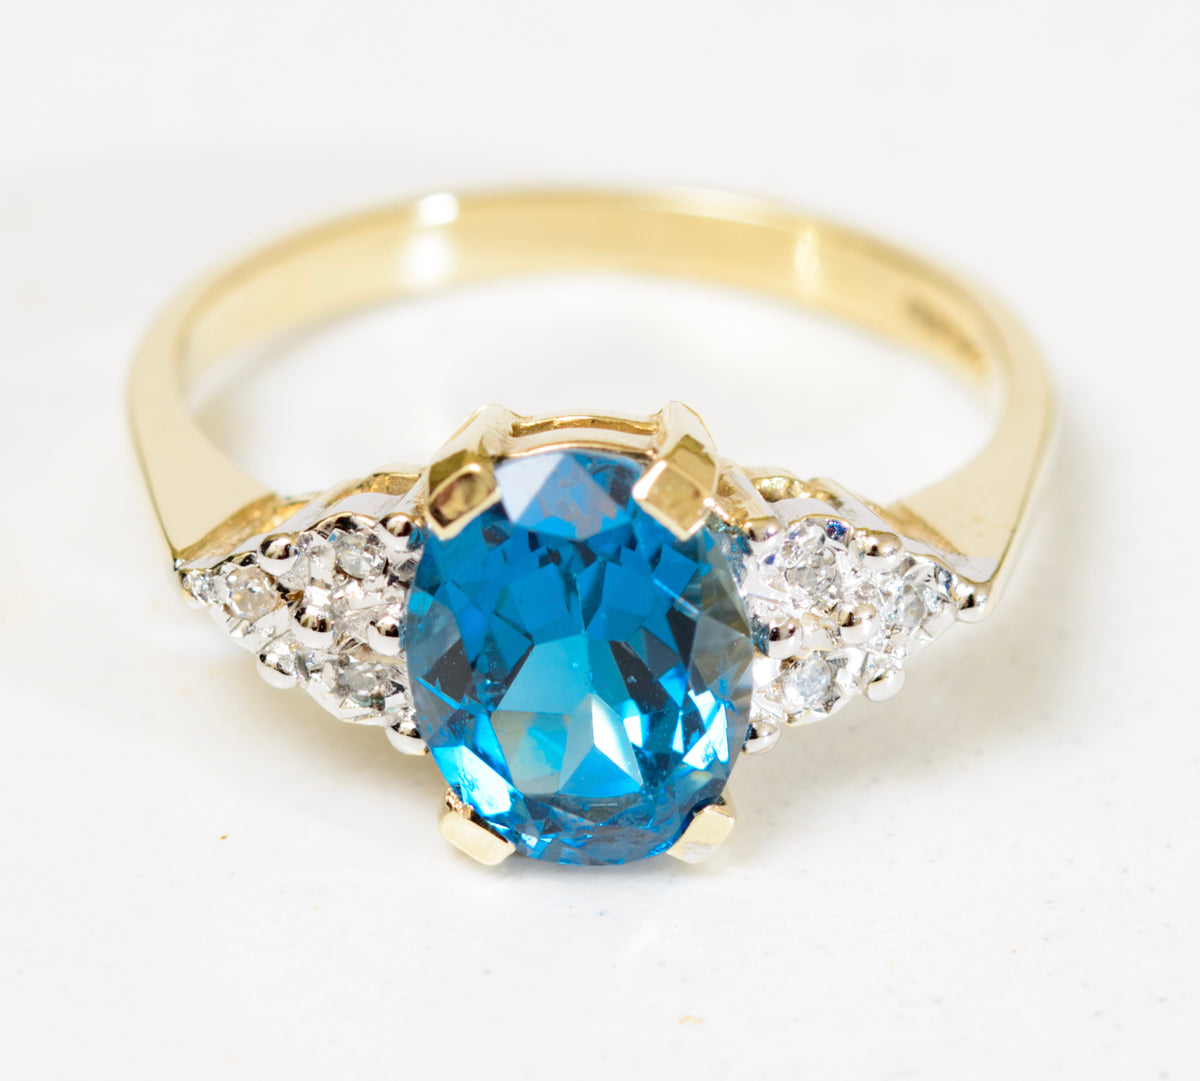 Vintage 9ct Gold Ring With Natural Blue Topaz & Diamond Gemstones (A1781)